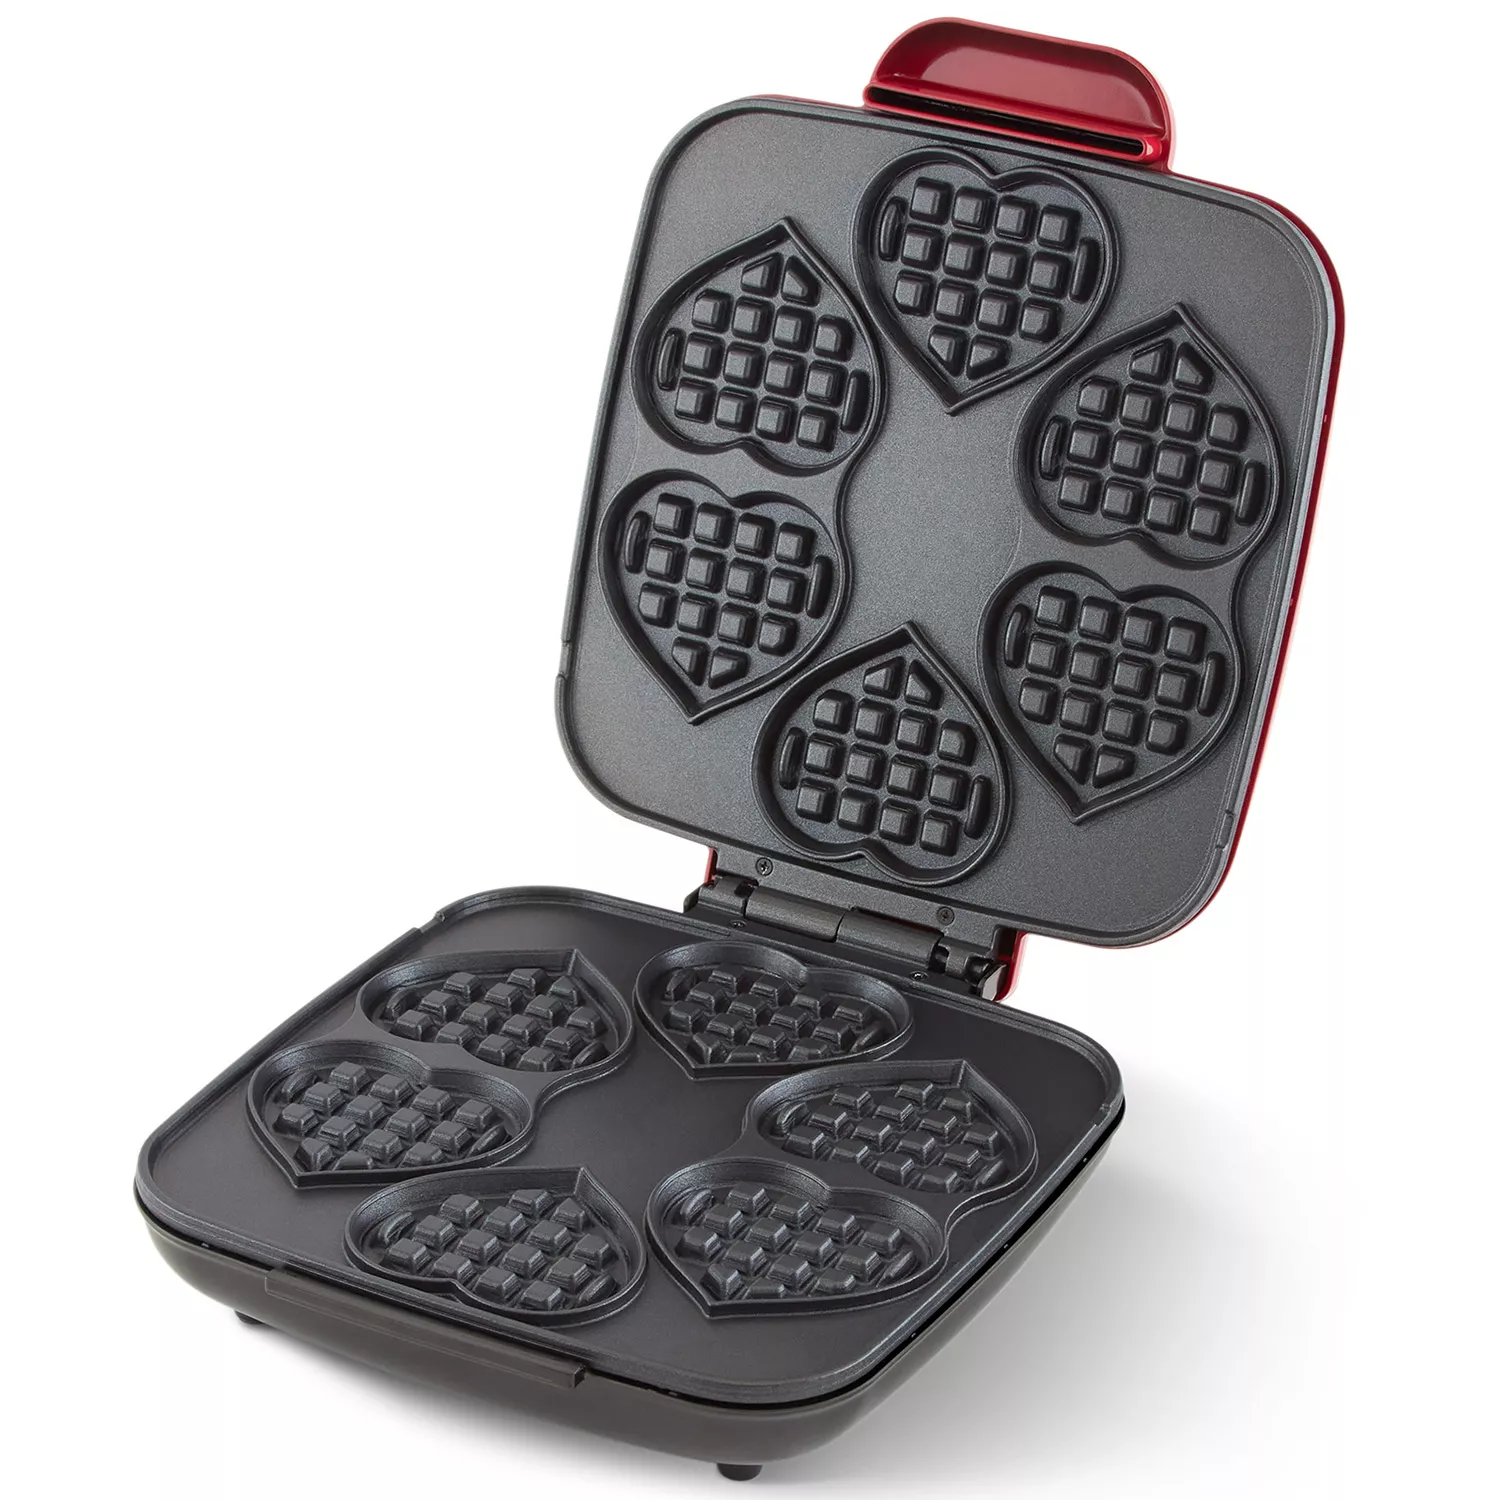 Dash 4 In. Red Mini Waffle Maker - Parker's Building Supply